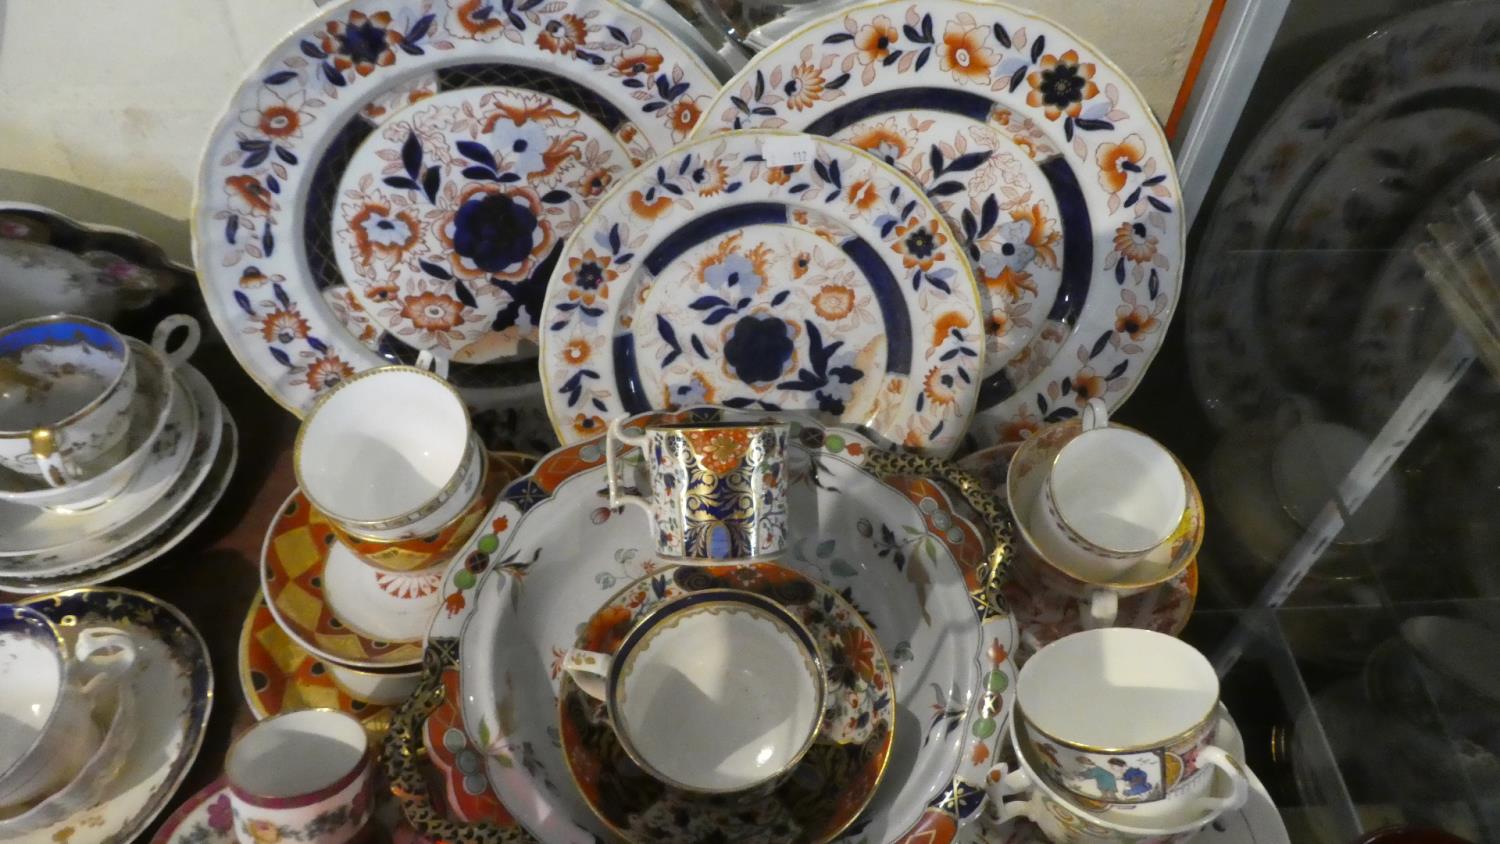 A Tray of Imari Pattern Ceramics to Include Teacups and Saucers, Plates and Bowls, Coffee Cans and